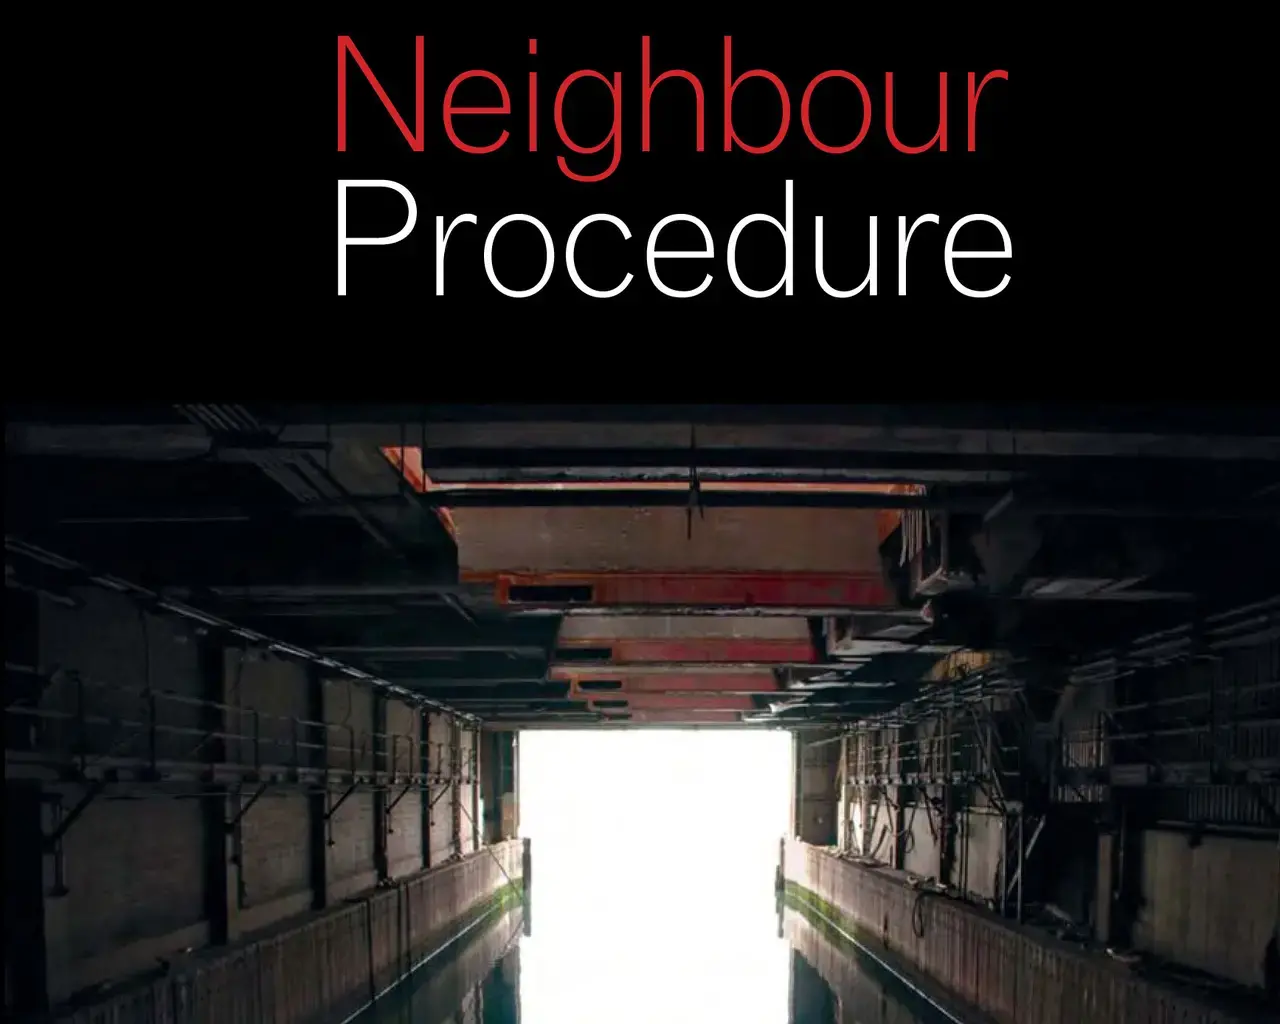 Syd Zolf, Neighbour Procedure cover, Coach House Books. Cover art by Nathan Kensinger, photo courtesy of the artist.